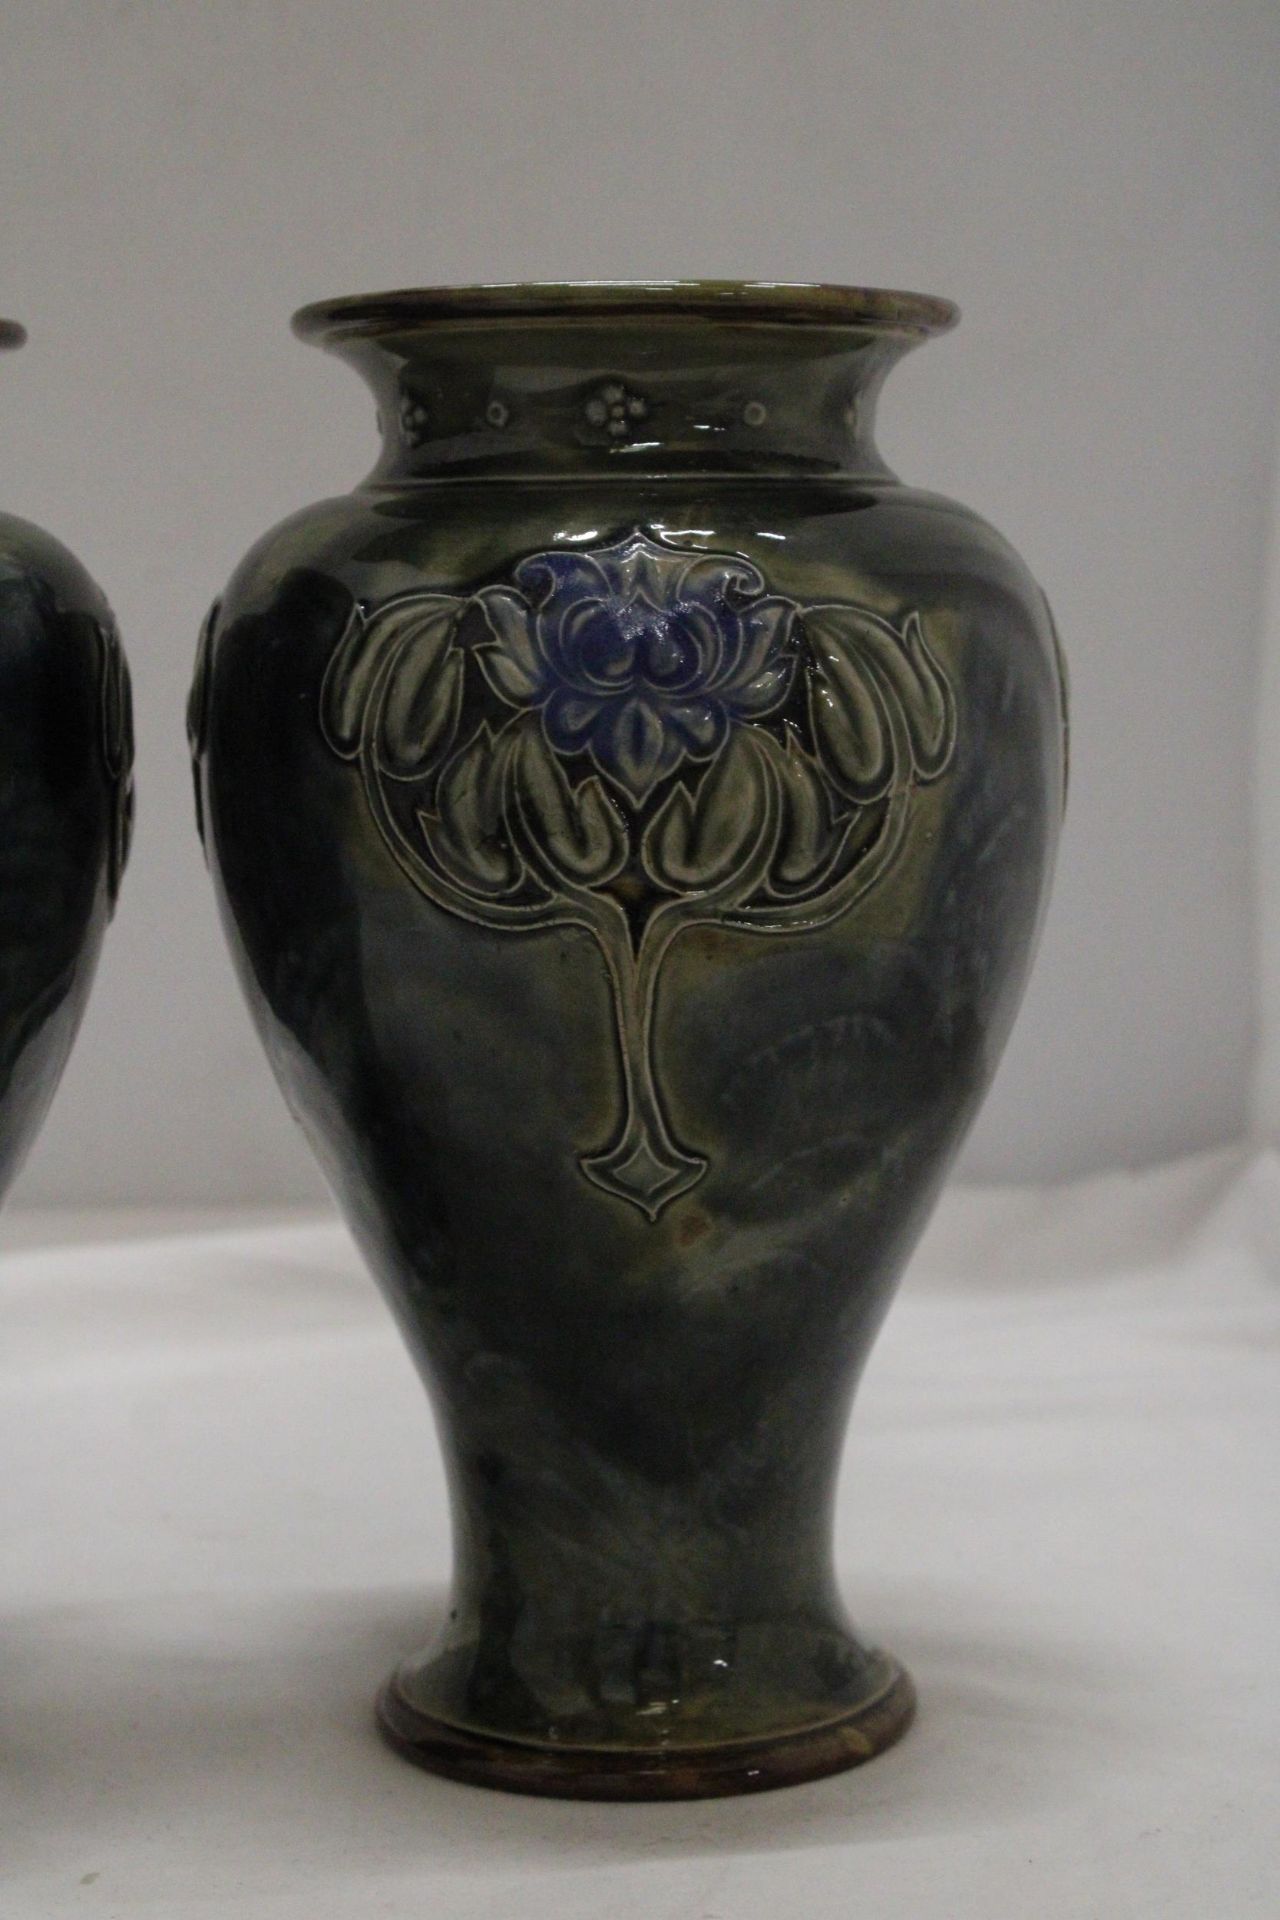 A PAIR OF ROYAL DOULTON LILY PARTINGTON ART NOUVEAU STYLE VASES WITH RELIEF FLOWERS - Image 4 of 7